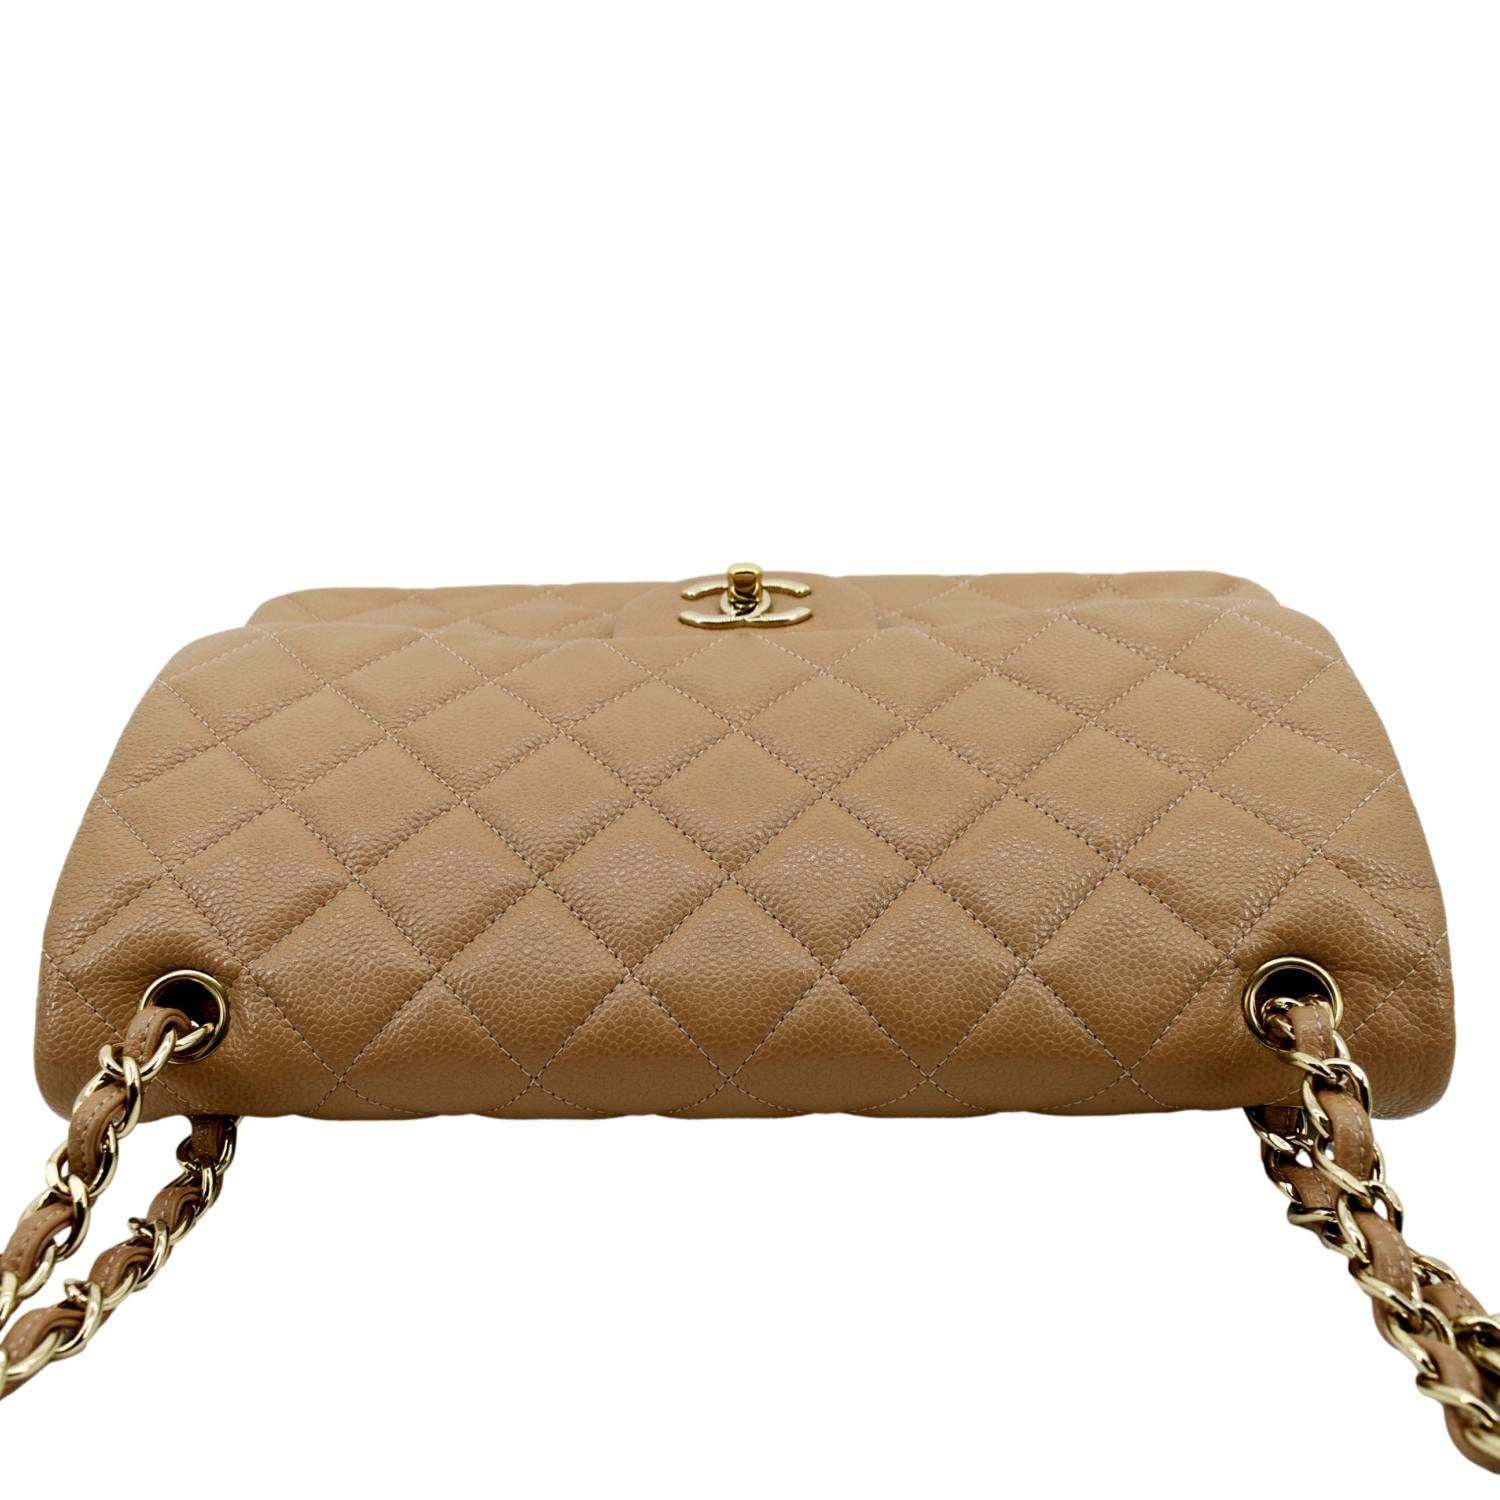 Chanel Brown Quilted Caviar Leather Jumbo Classic Double Flap Bag